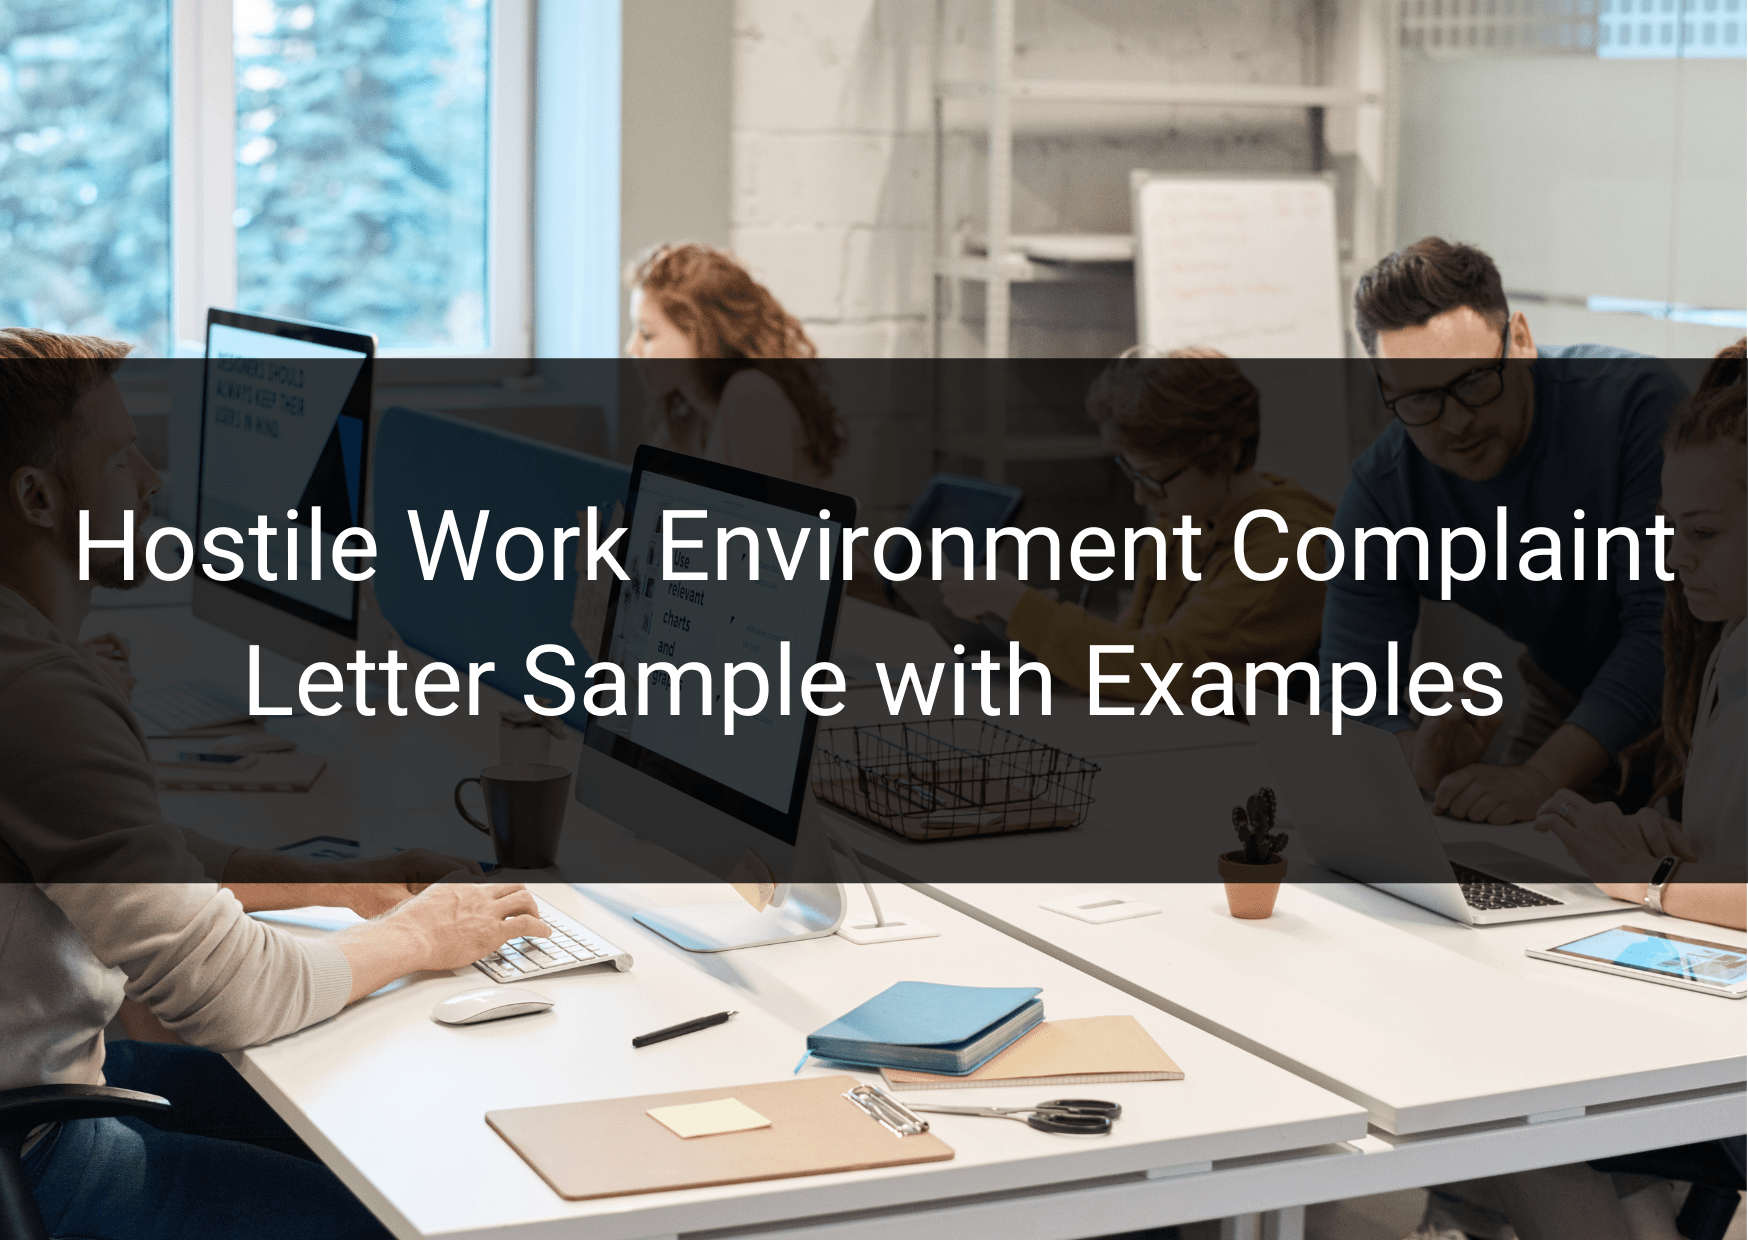 Hostile Work Environment Complaint Letter Sample with Examples